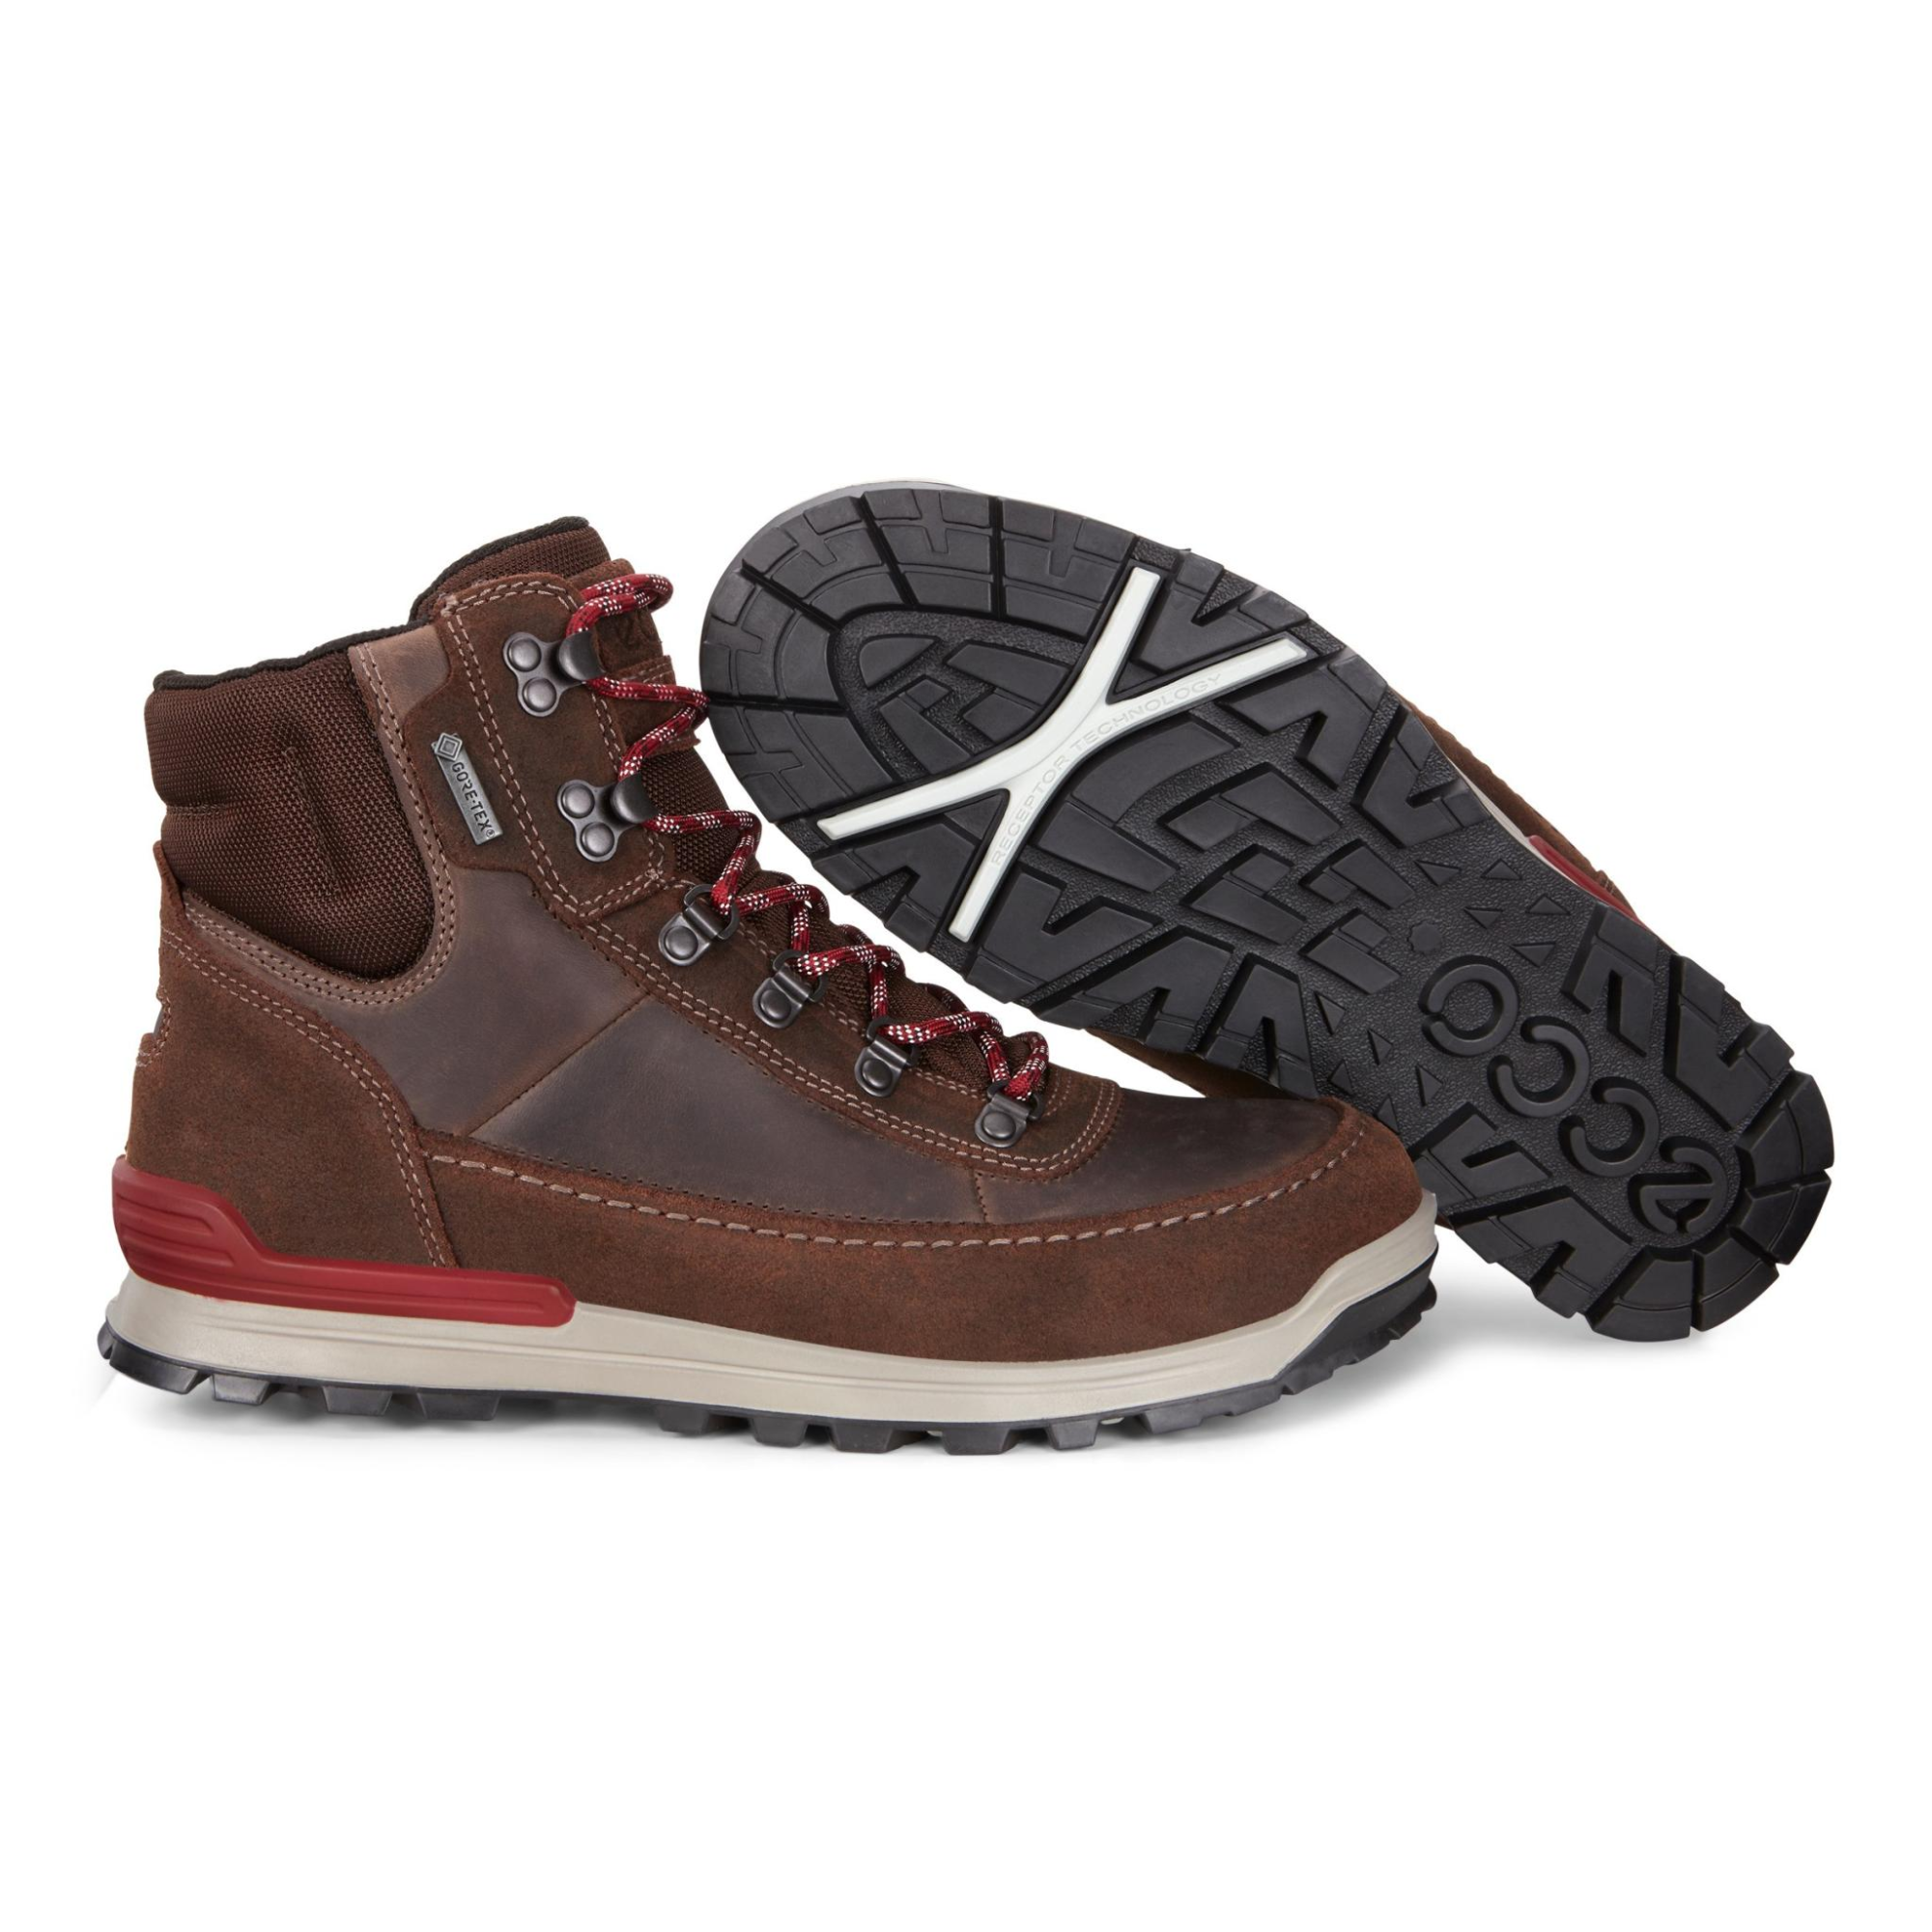 Ondeugd Gevoel Perth Ecco Mens Oregon GTX Boot 46 - Products - Veryk Mall - Veryk Mall, many  product, quick response, safe your money!